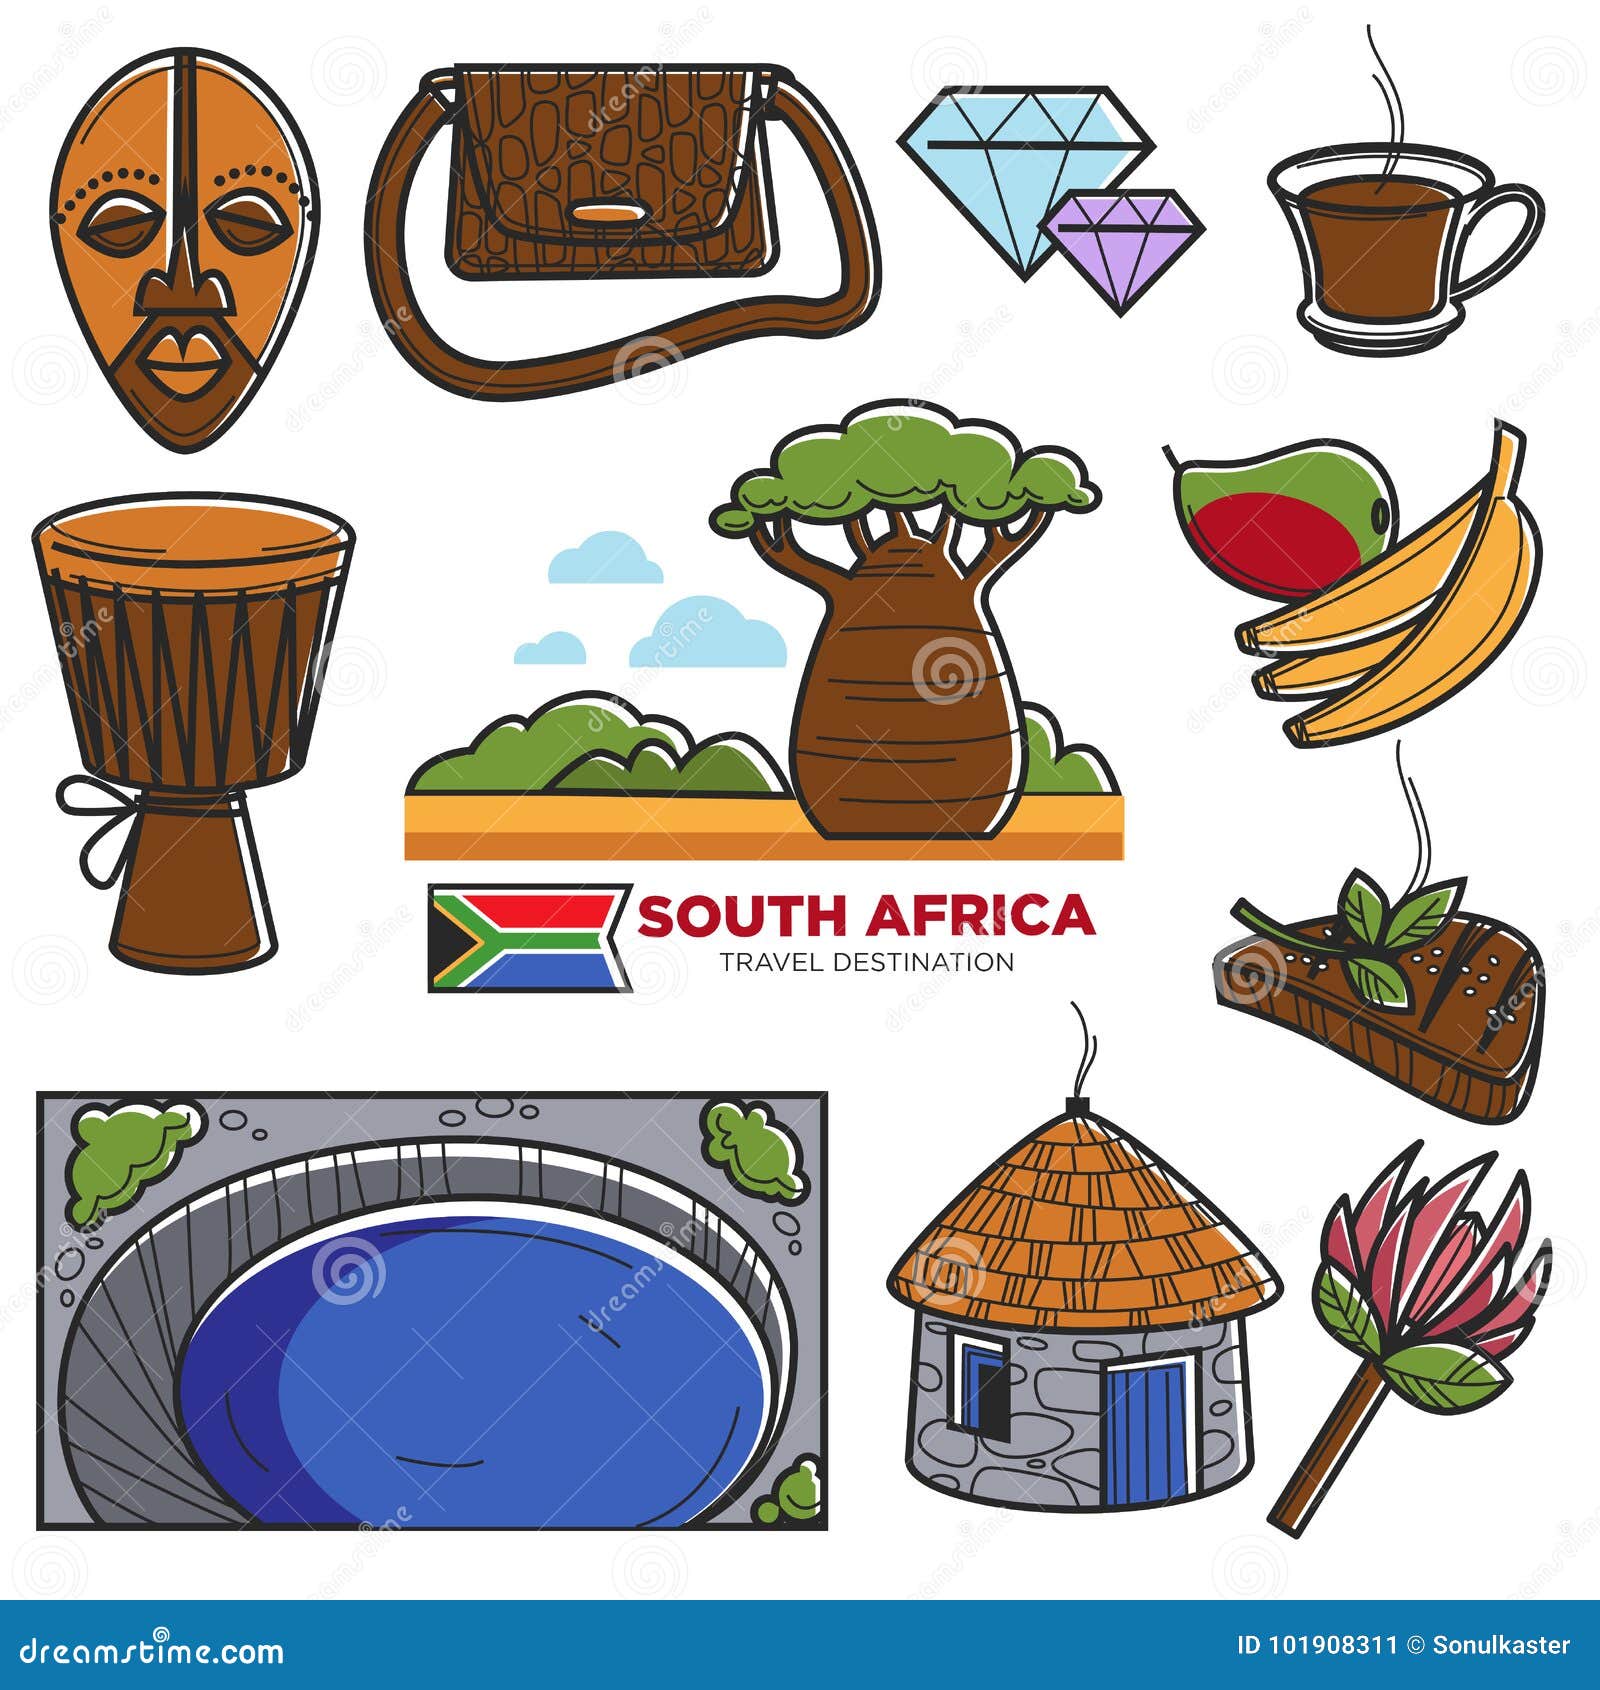 tourism signs and symbols south africa